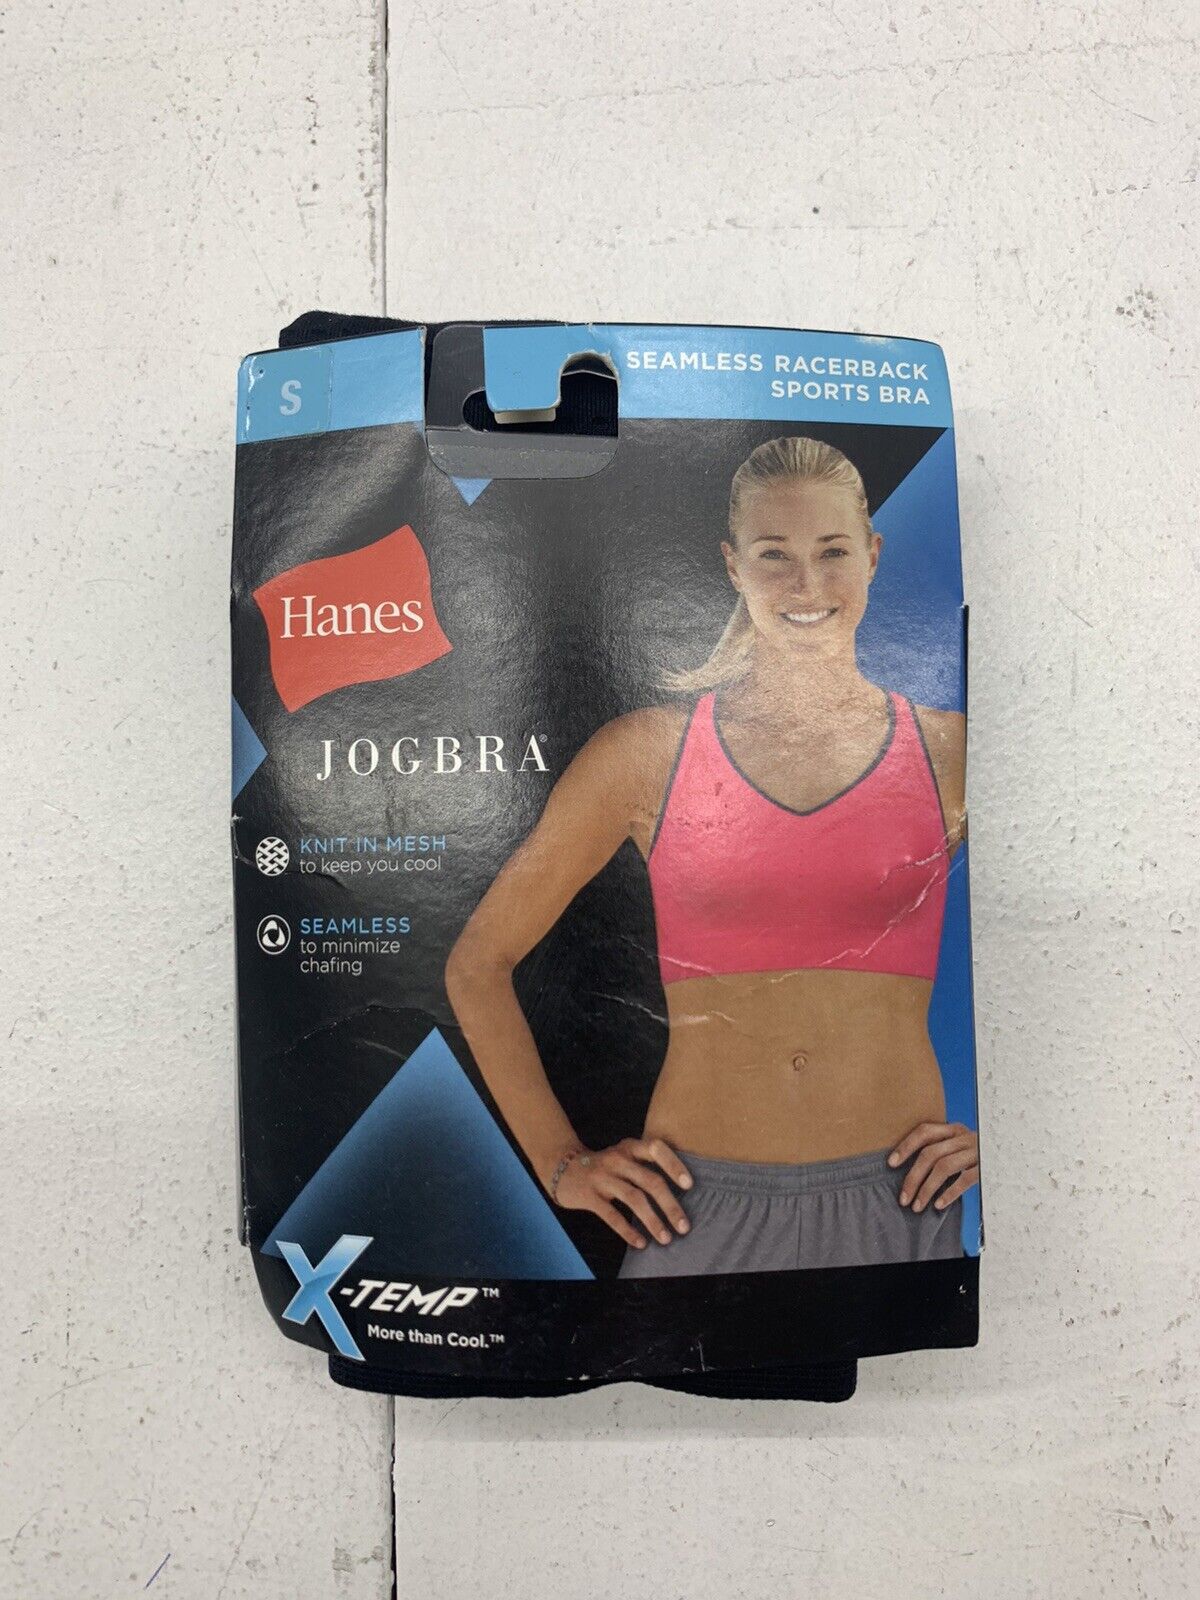 Hanes Women's Ultimate Comfy Support Wirefree 2 Pack, Black